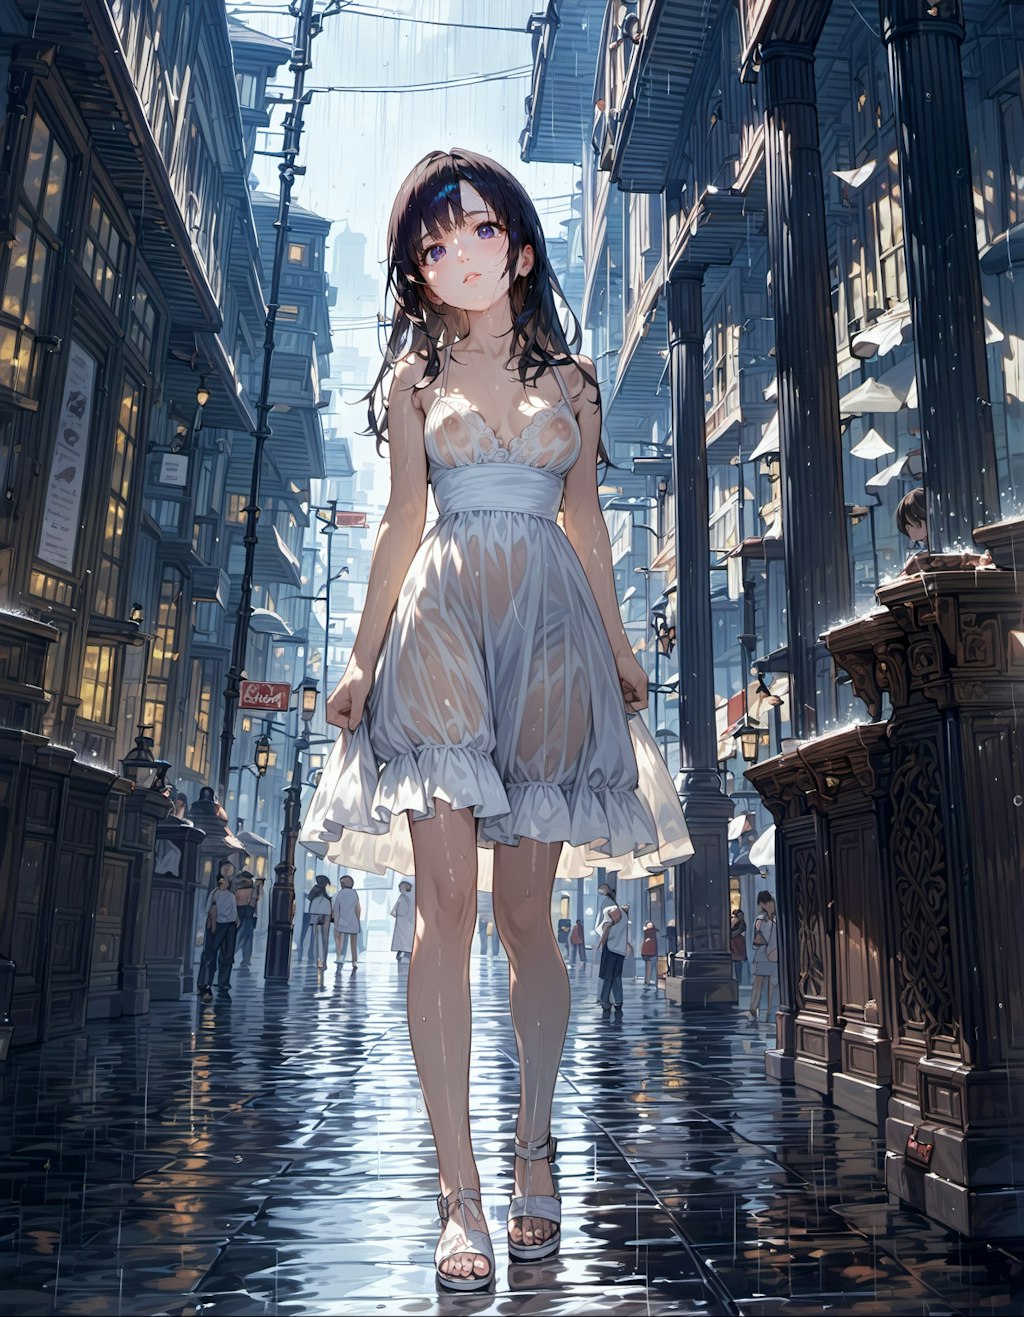 A girl standing in the rain